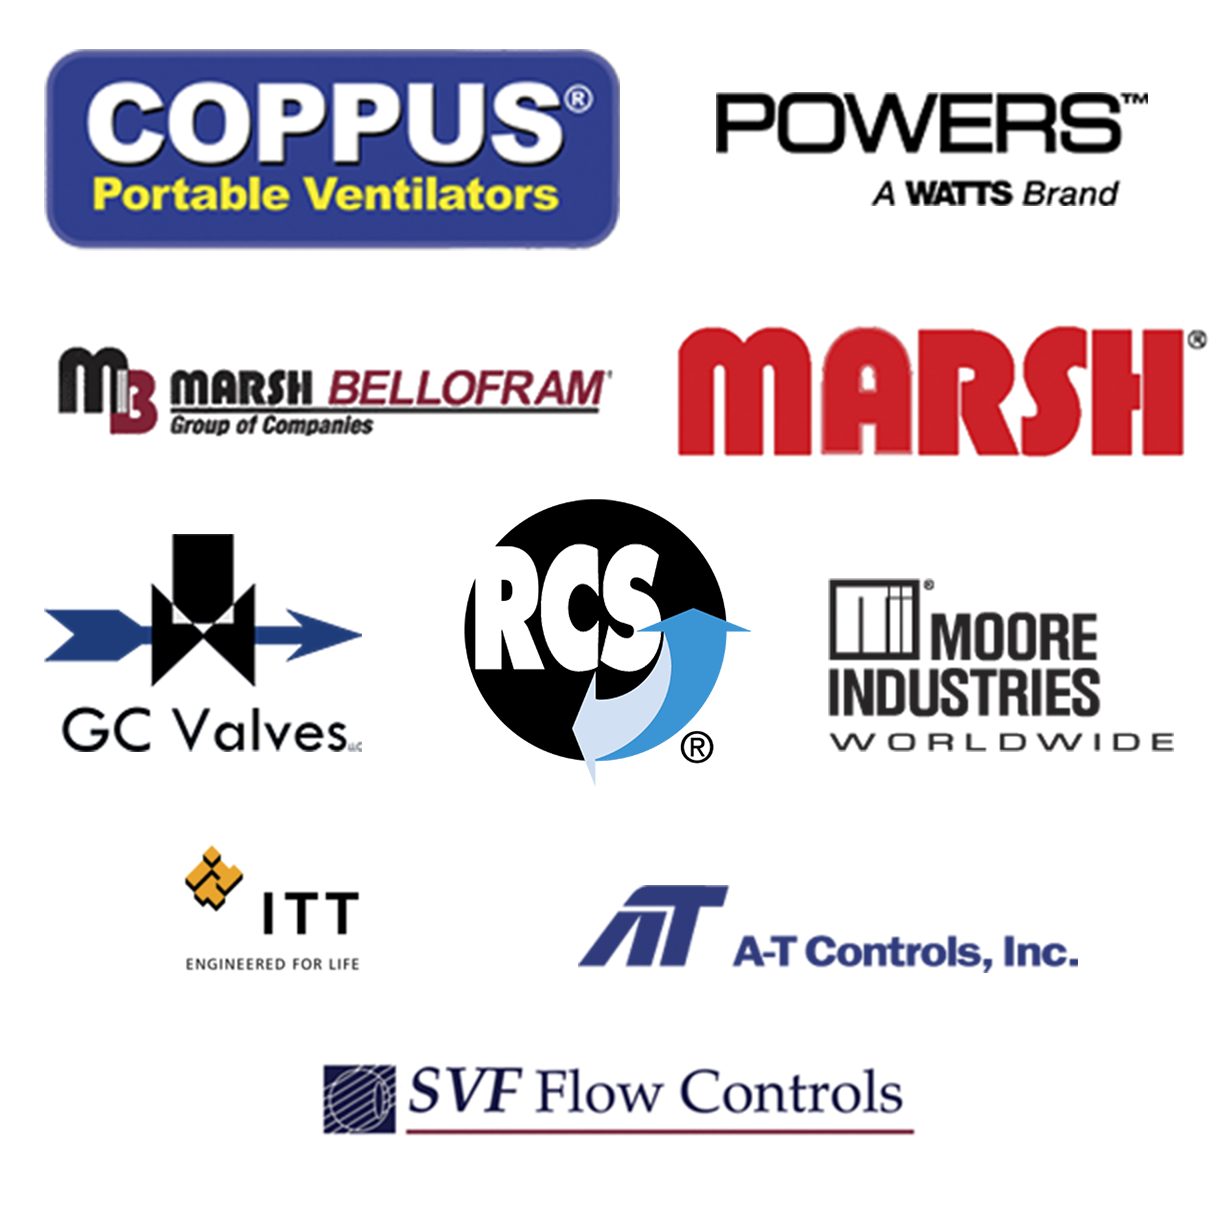 Mountain Controls works with the companies represented by the logos in this image